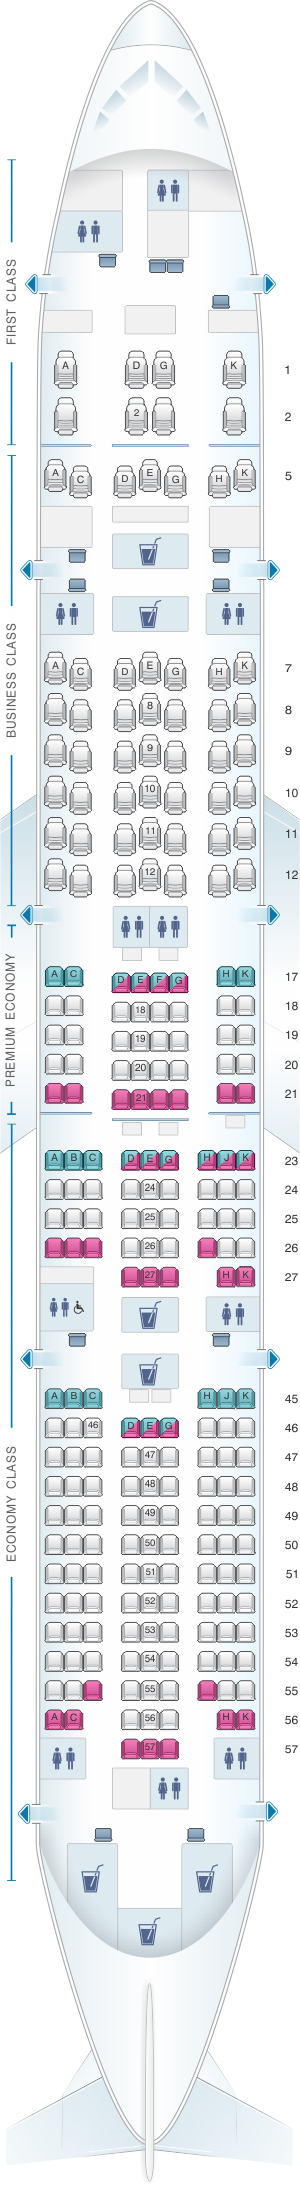 Seat Map Japan Airlines (JAL) Boeing B777 300ER W84 | SeatMaestro